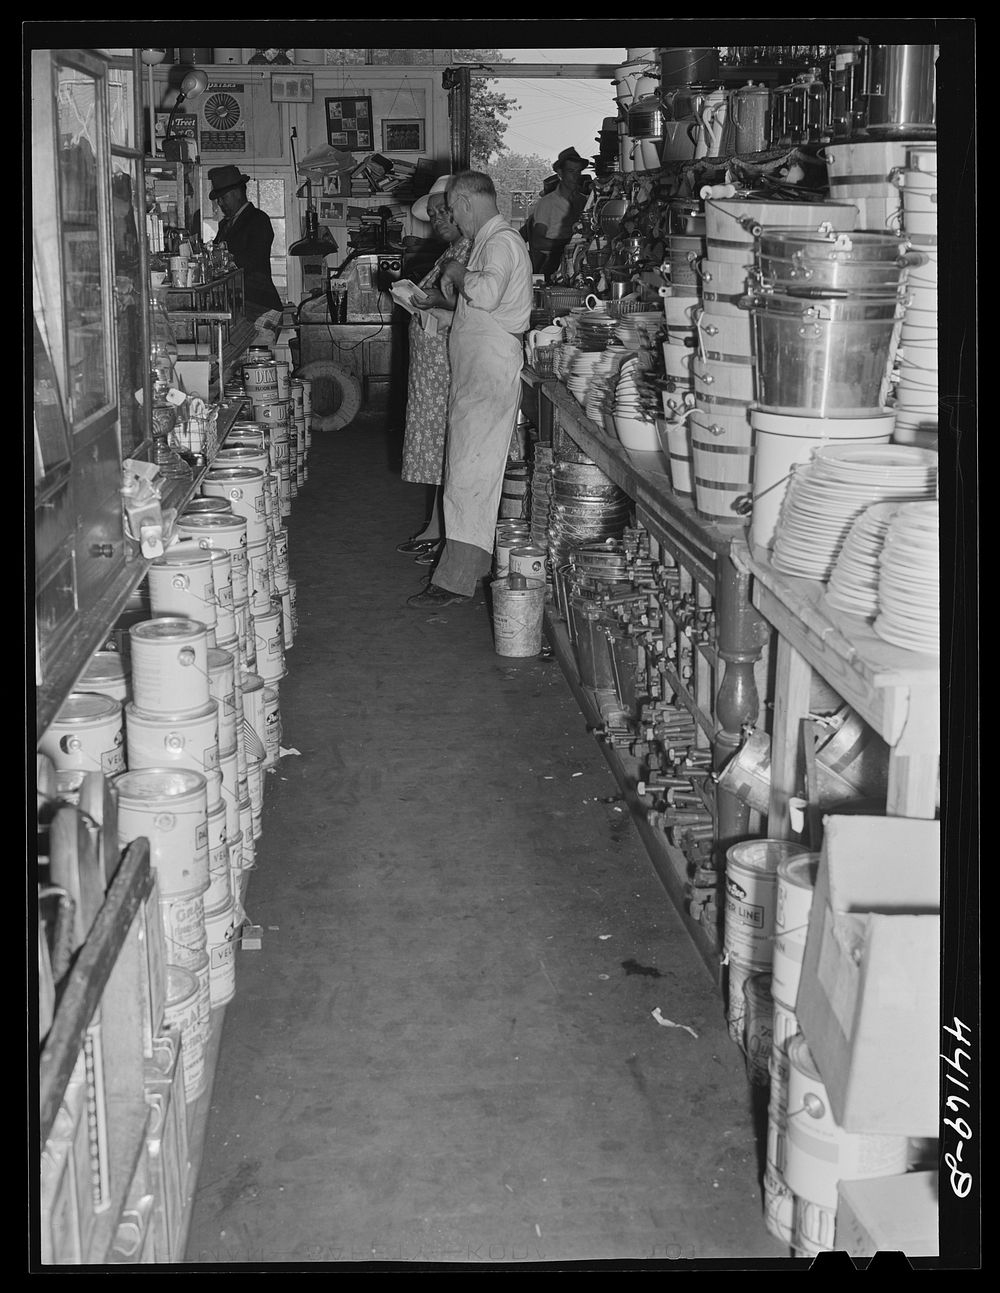 In the Bickers-Goodwin general store in Greensboro. Greene County, Georgia. Sourced from the Library of Congress.